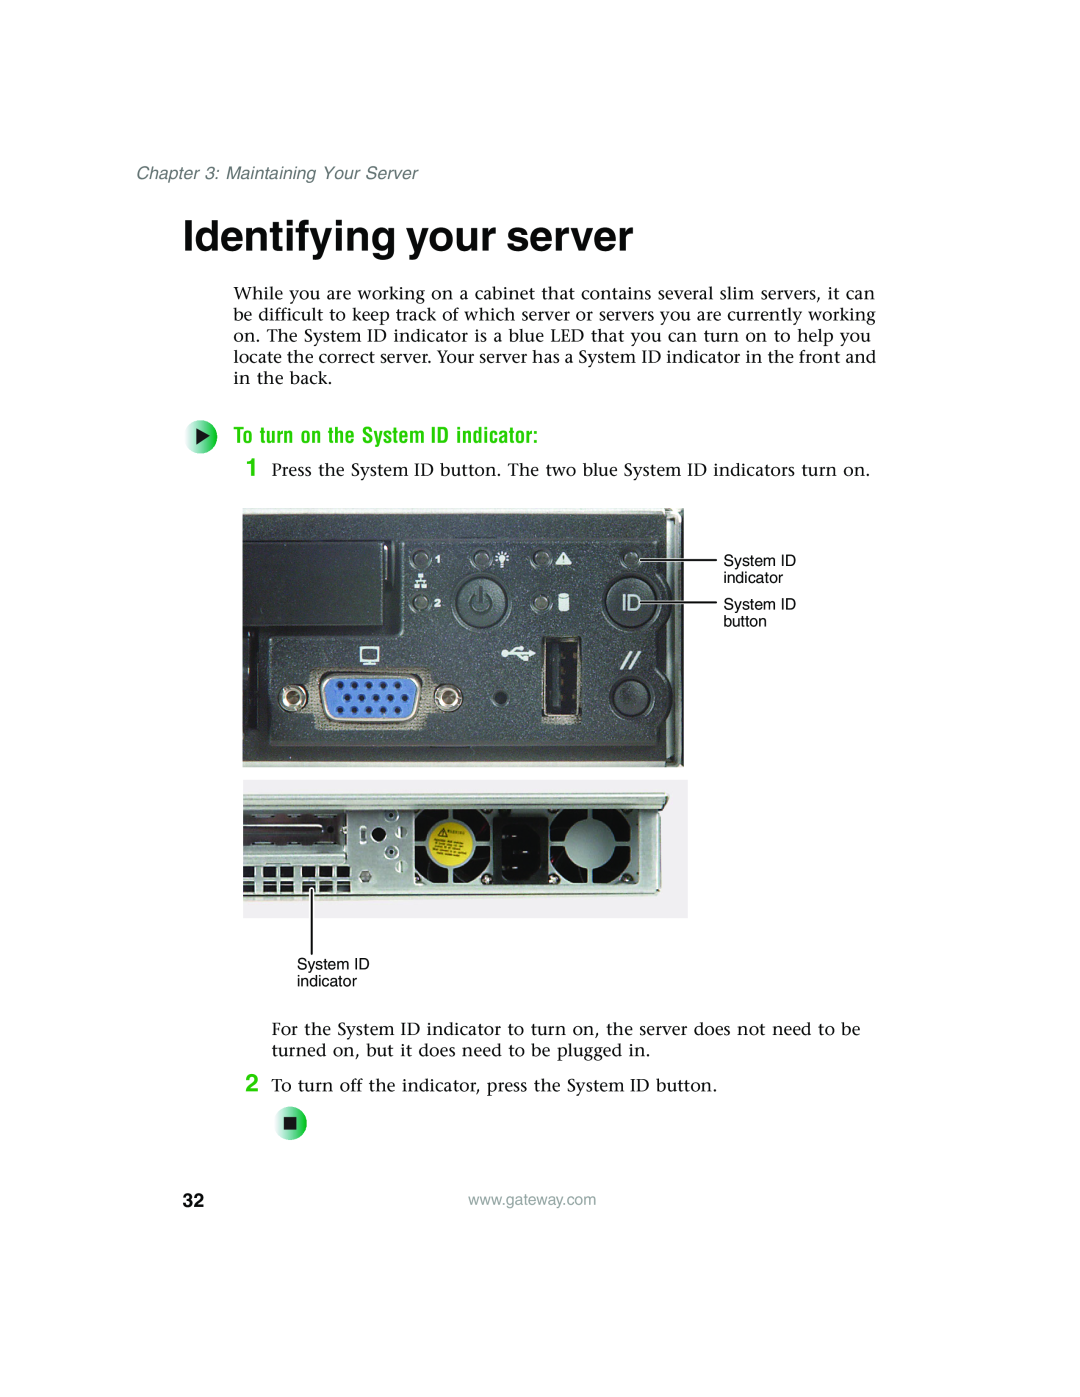 Gateway 955 manual Identifying your server, To turn on the System ID indicator, Maintaining Your Server 